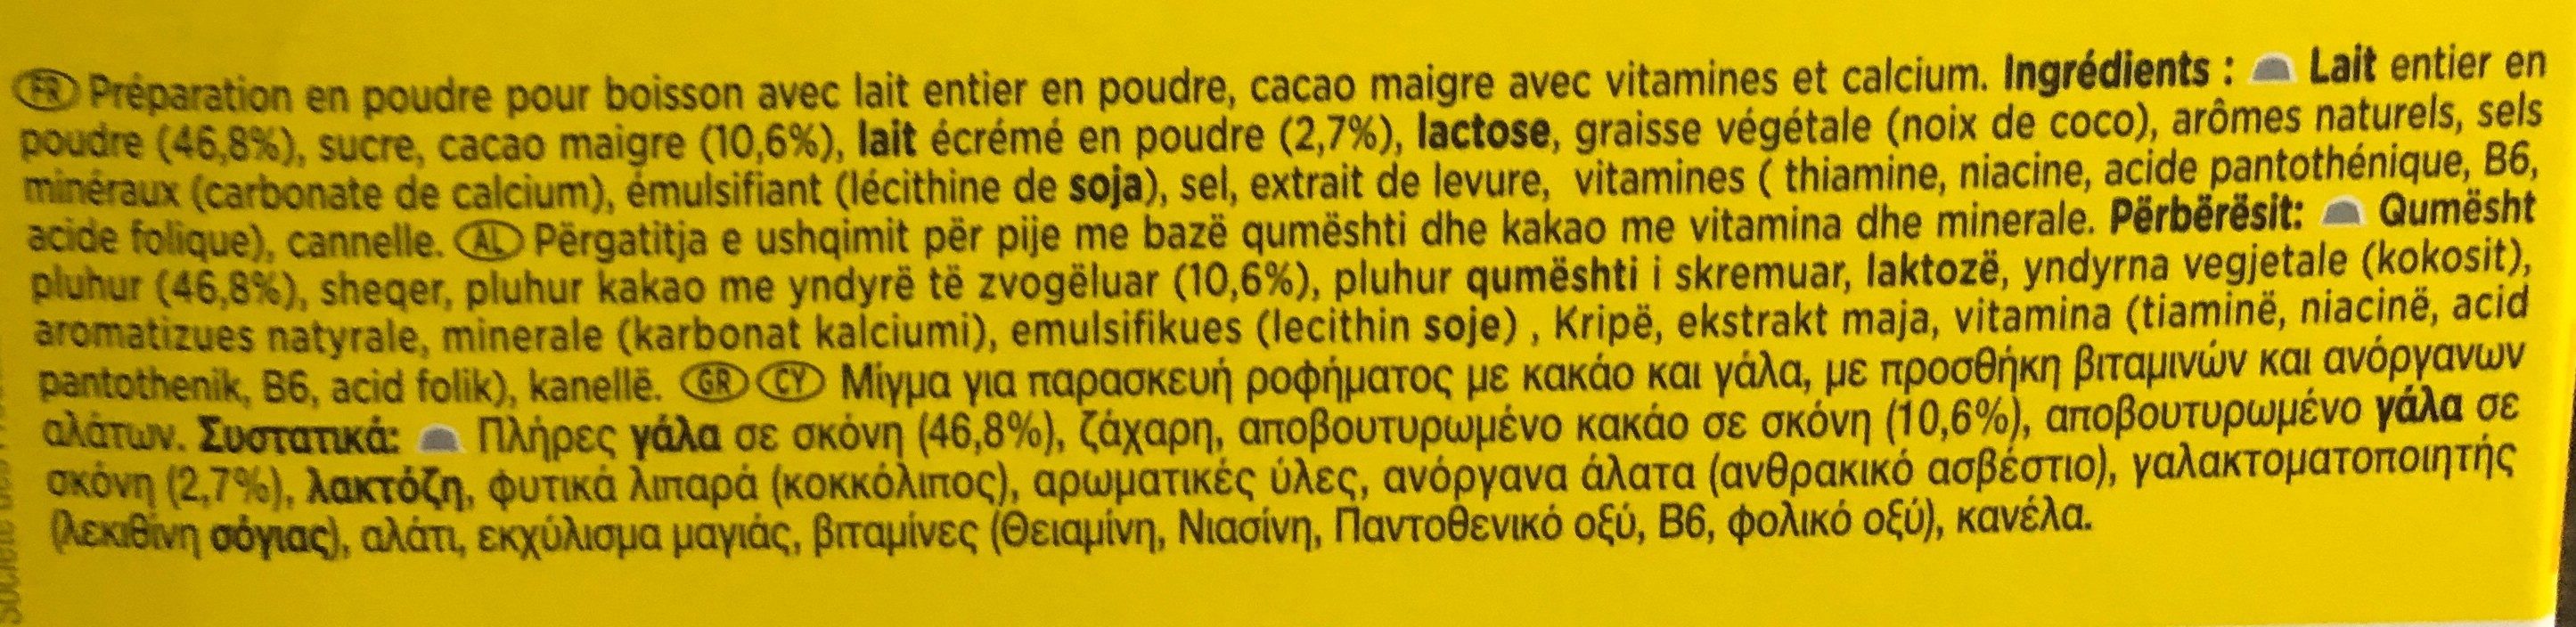 Dolce Gusto Nesquik - Ingredients - fr